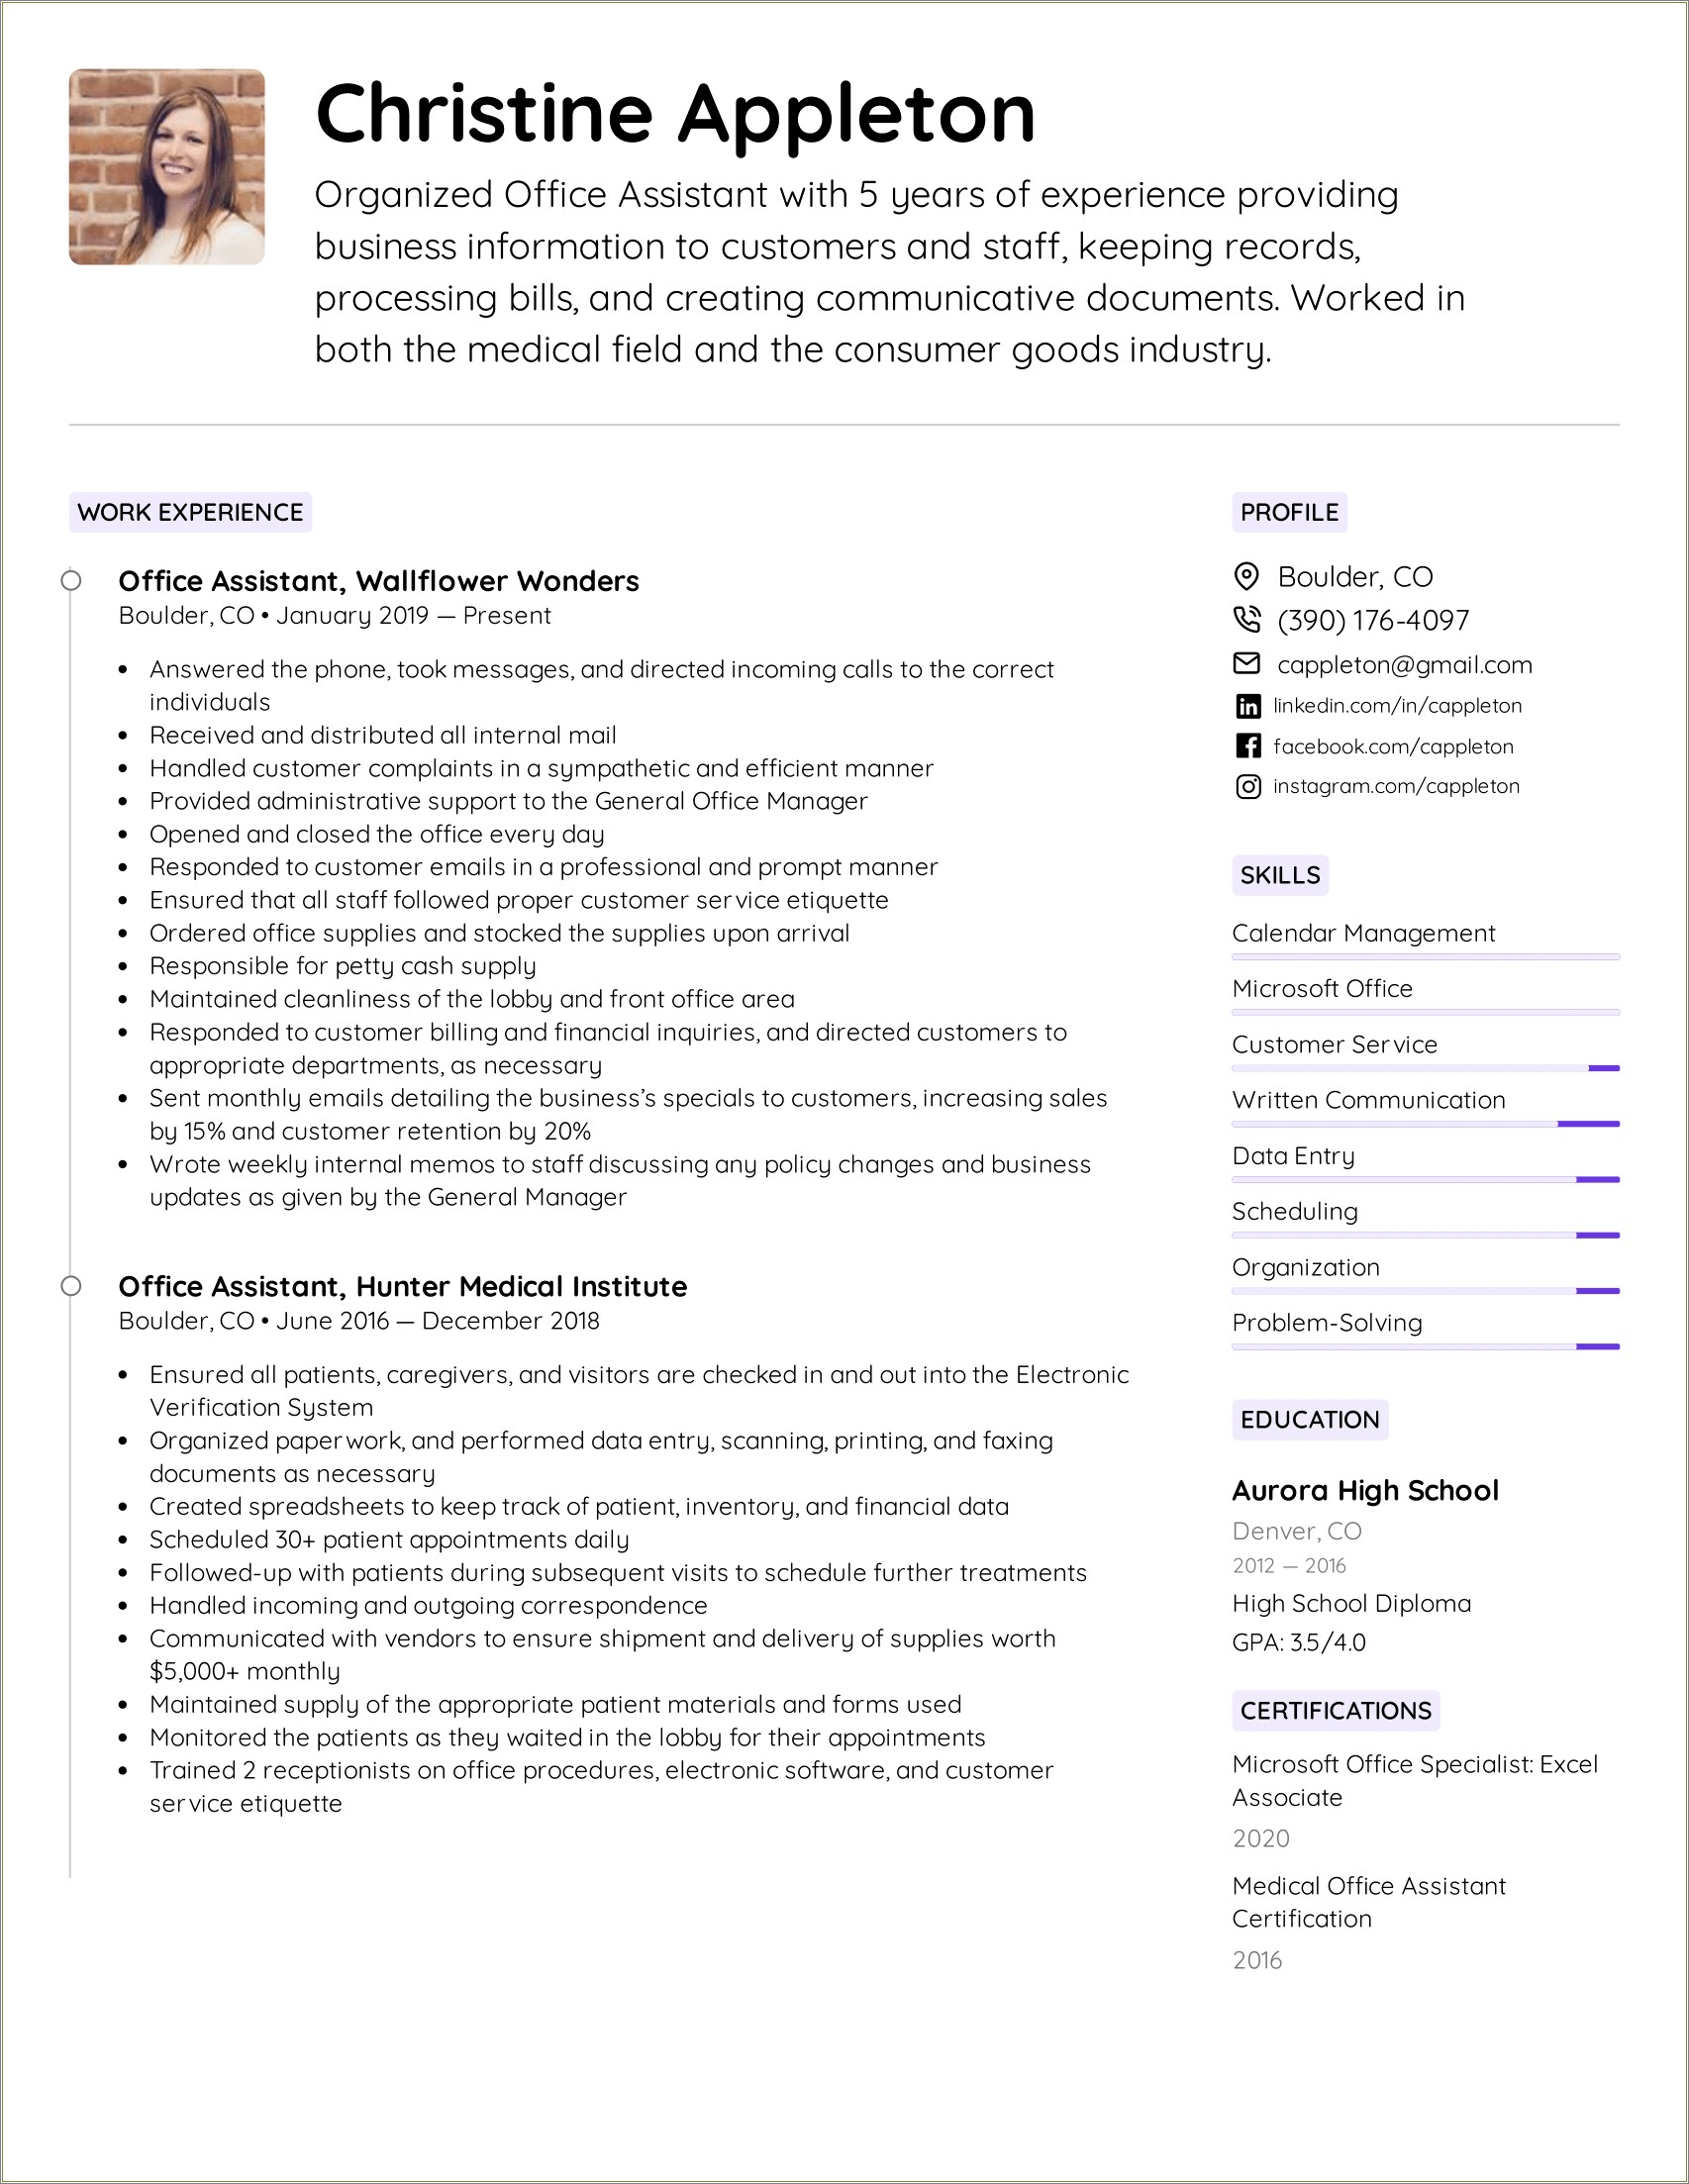 Putting College Teaching Assistant On Resume